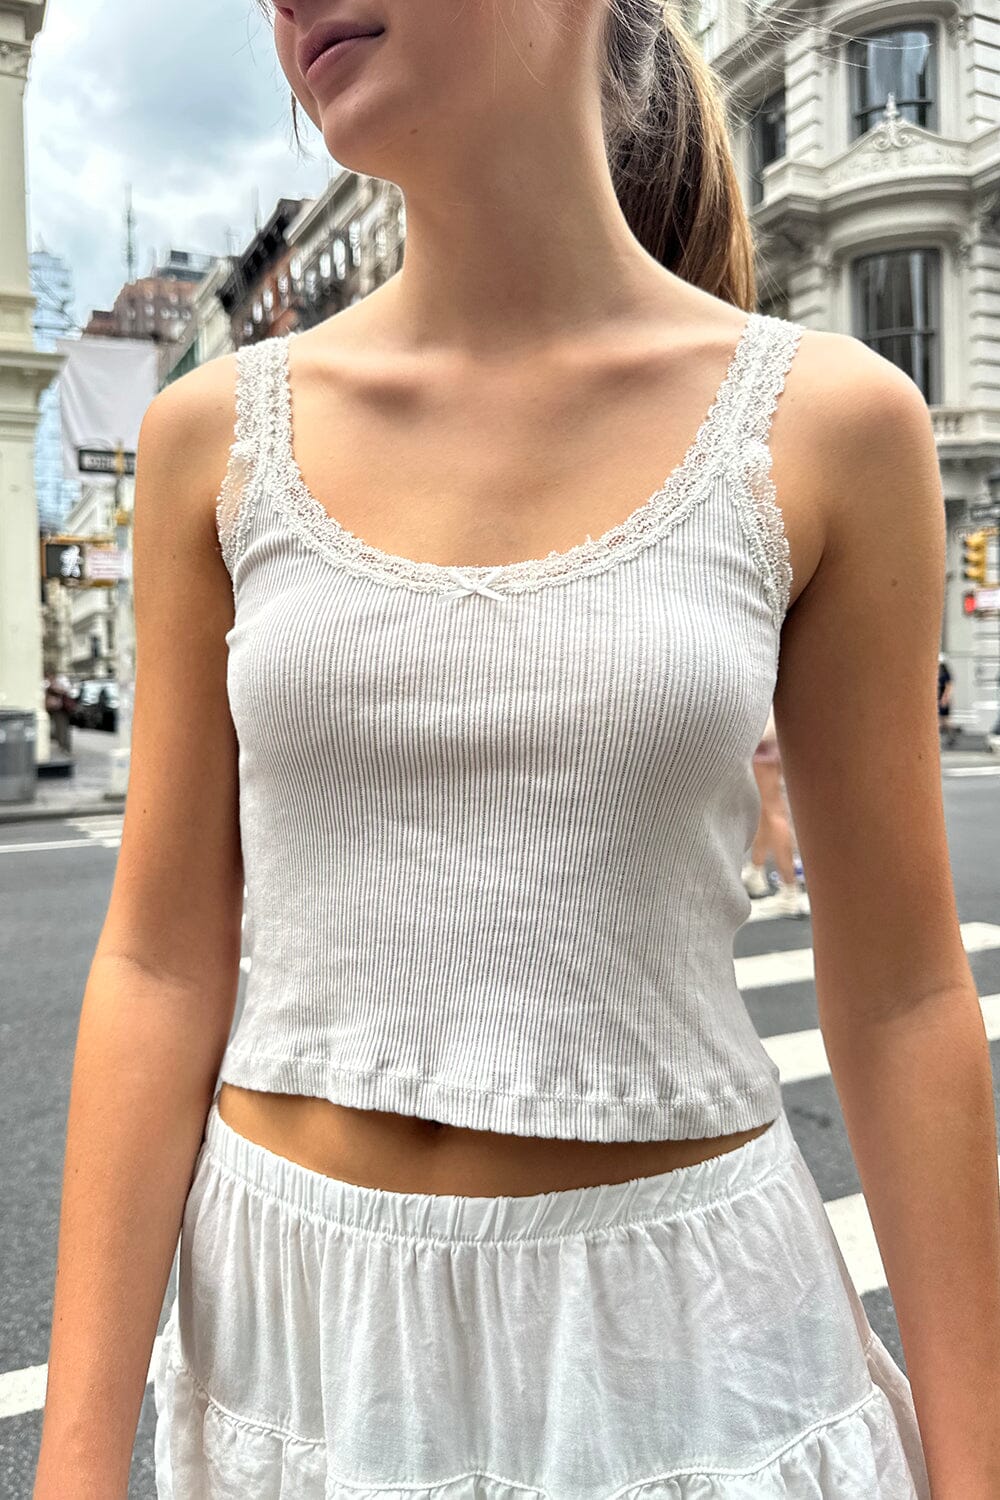 Brandy Melville Heart Flame Beyonca Tank Top White - $14 (12% Off Retail) -  From jtboutique.